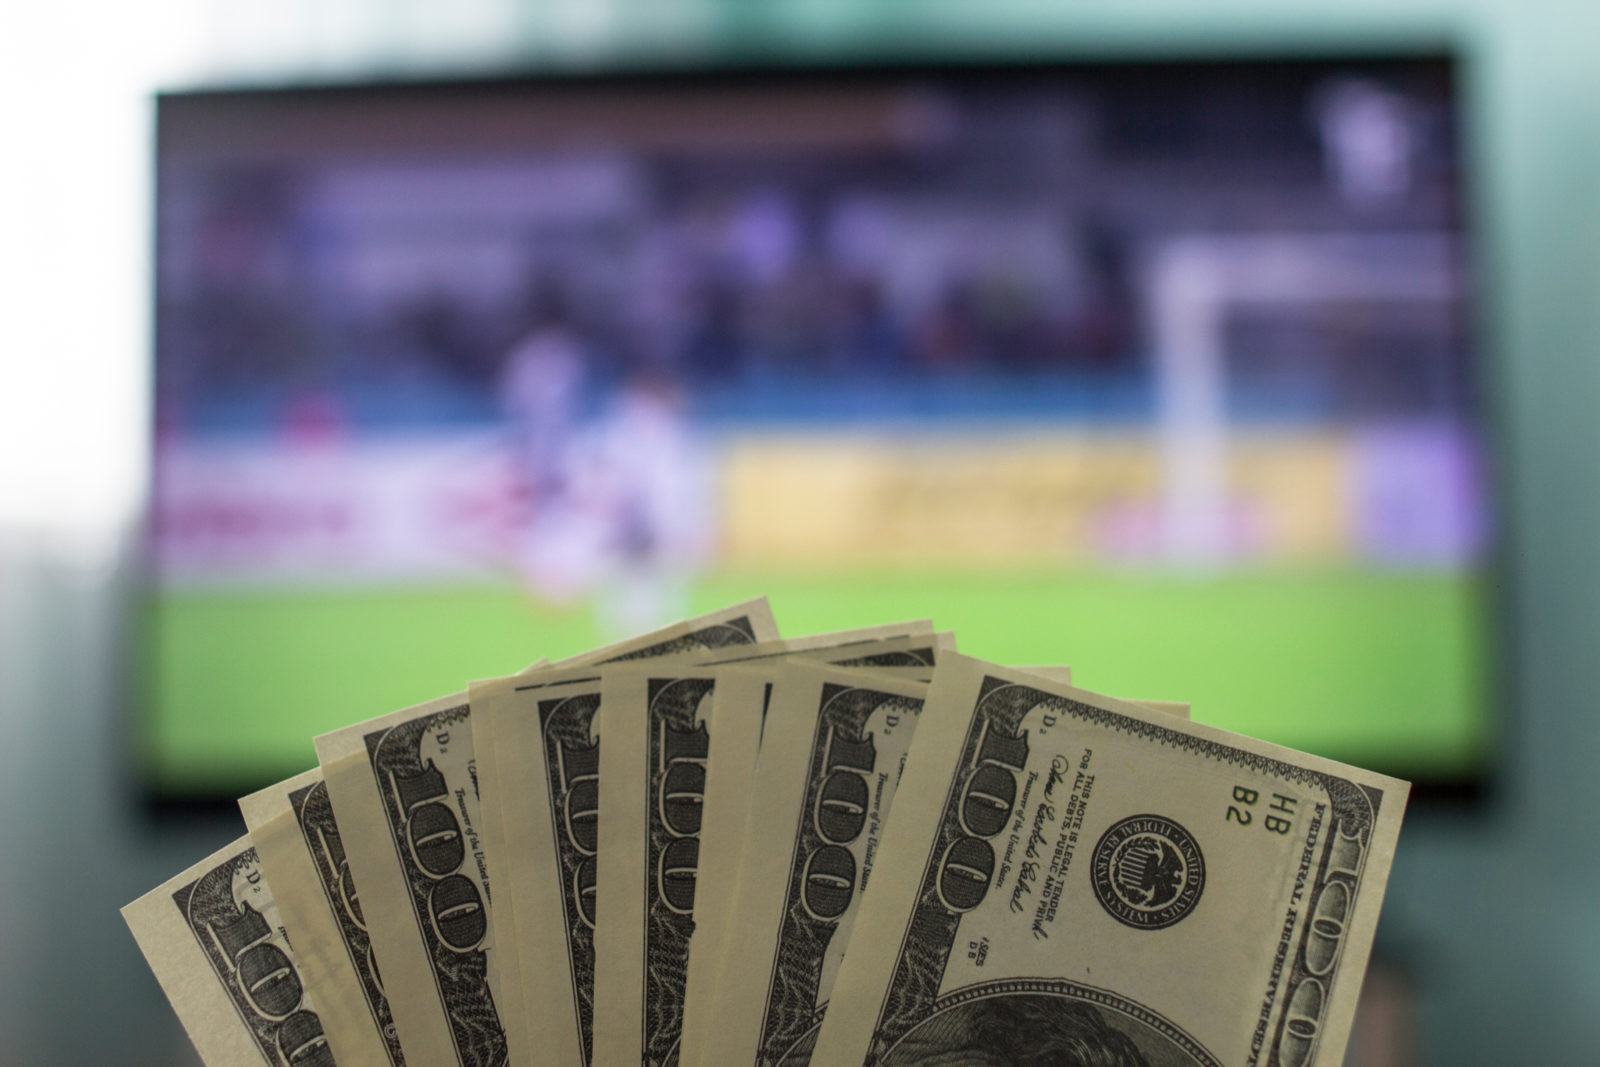 Men's hands keep money dollars against the background of a TV set on which football is playing, close-ups, gain 2023/03/AdobeStock_208490250.jpeg 